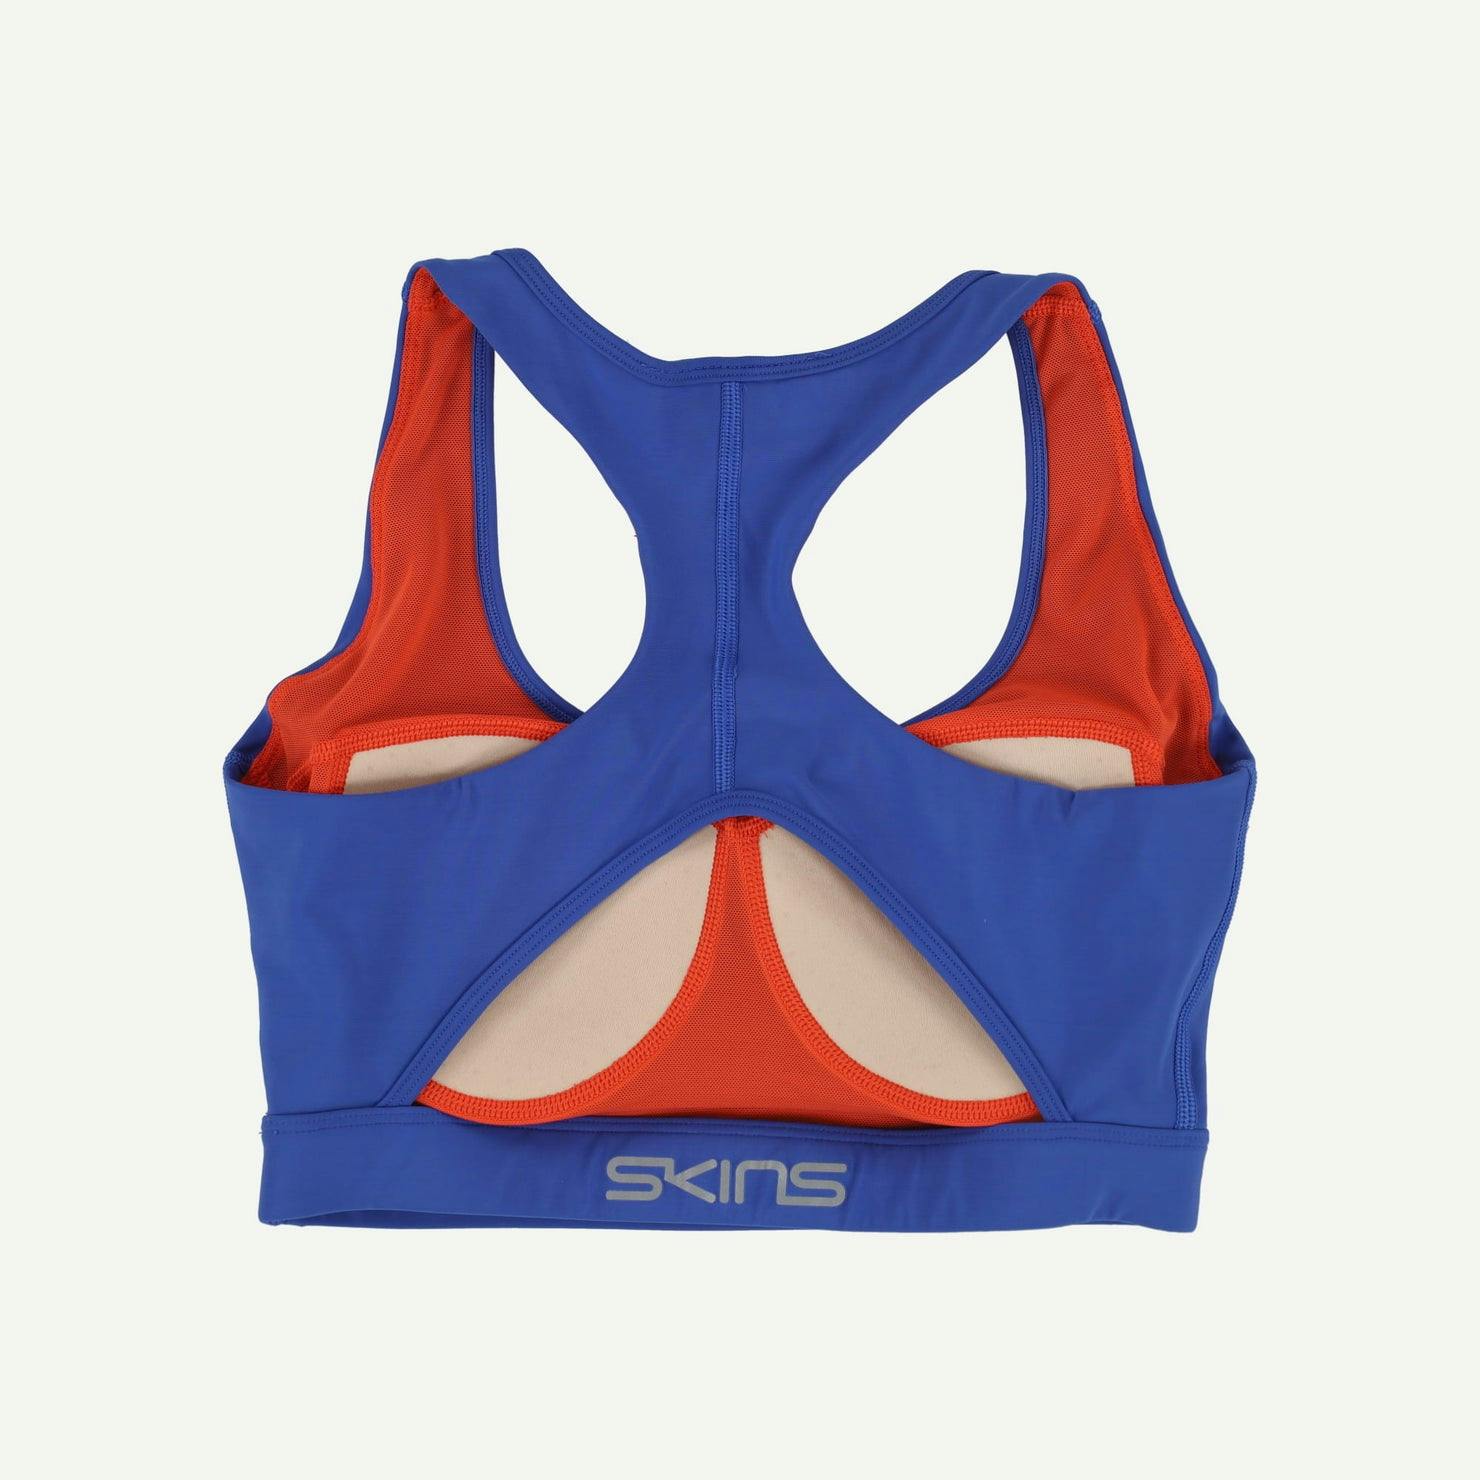 SKINS Compression As new Blue Series 3 Sports Bra